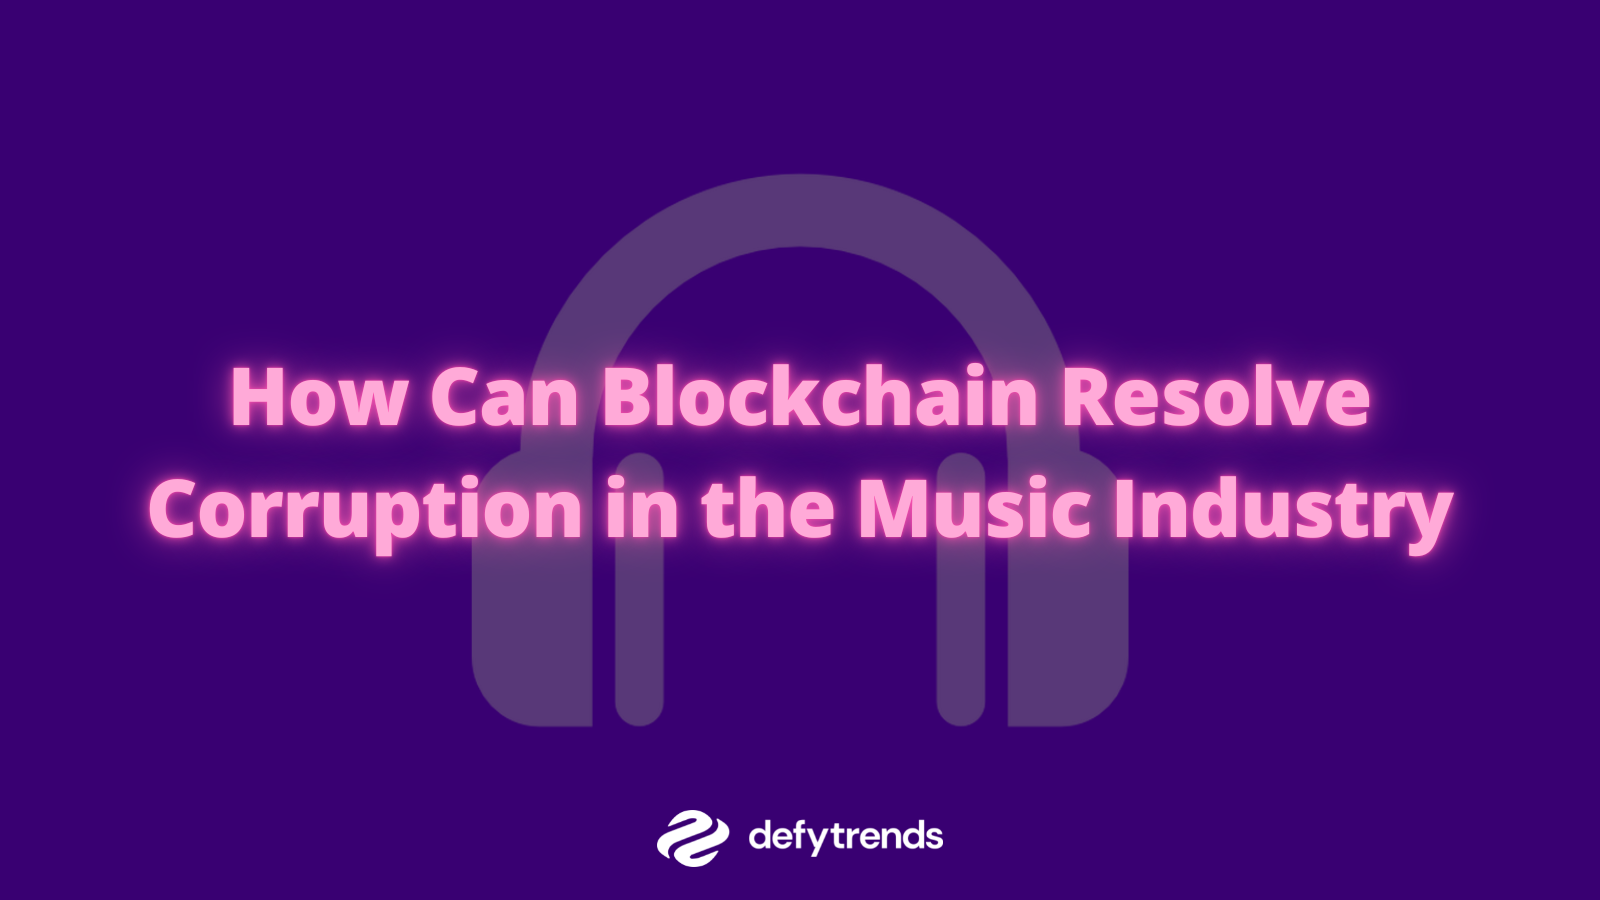 How Can Blockchain Resolve Corruption in the Music Industry